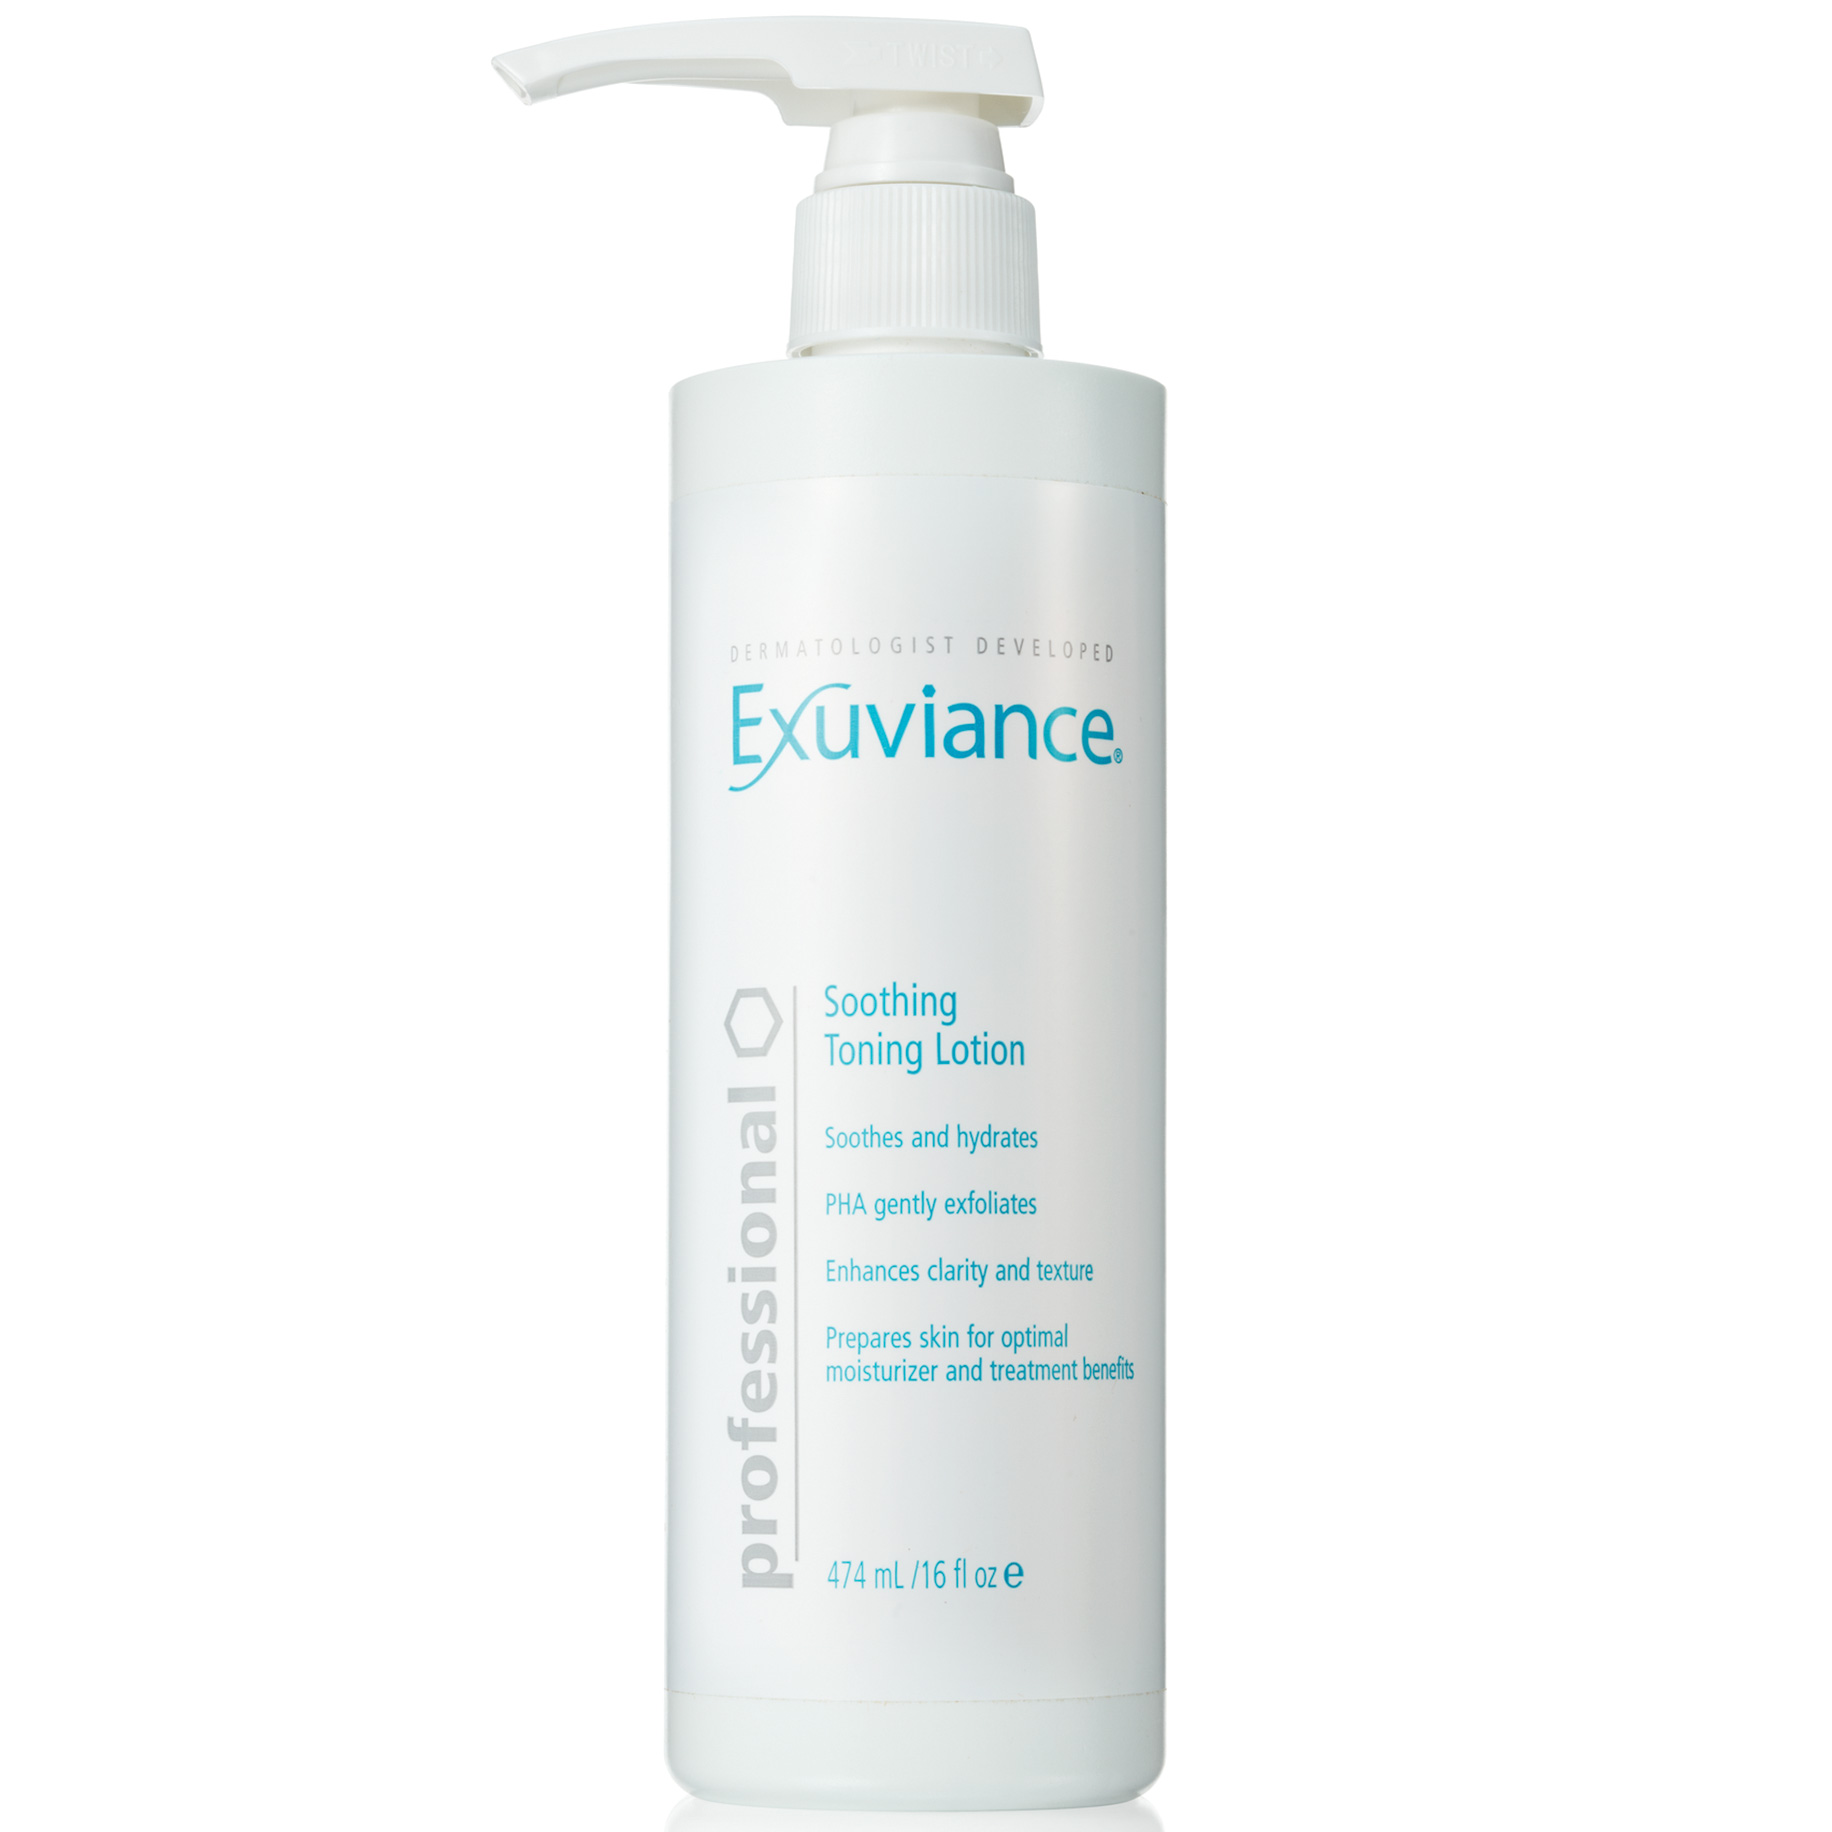 Soothing Toning Lotion Professional 